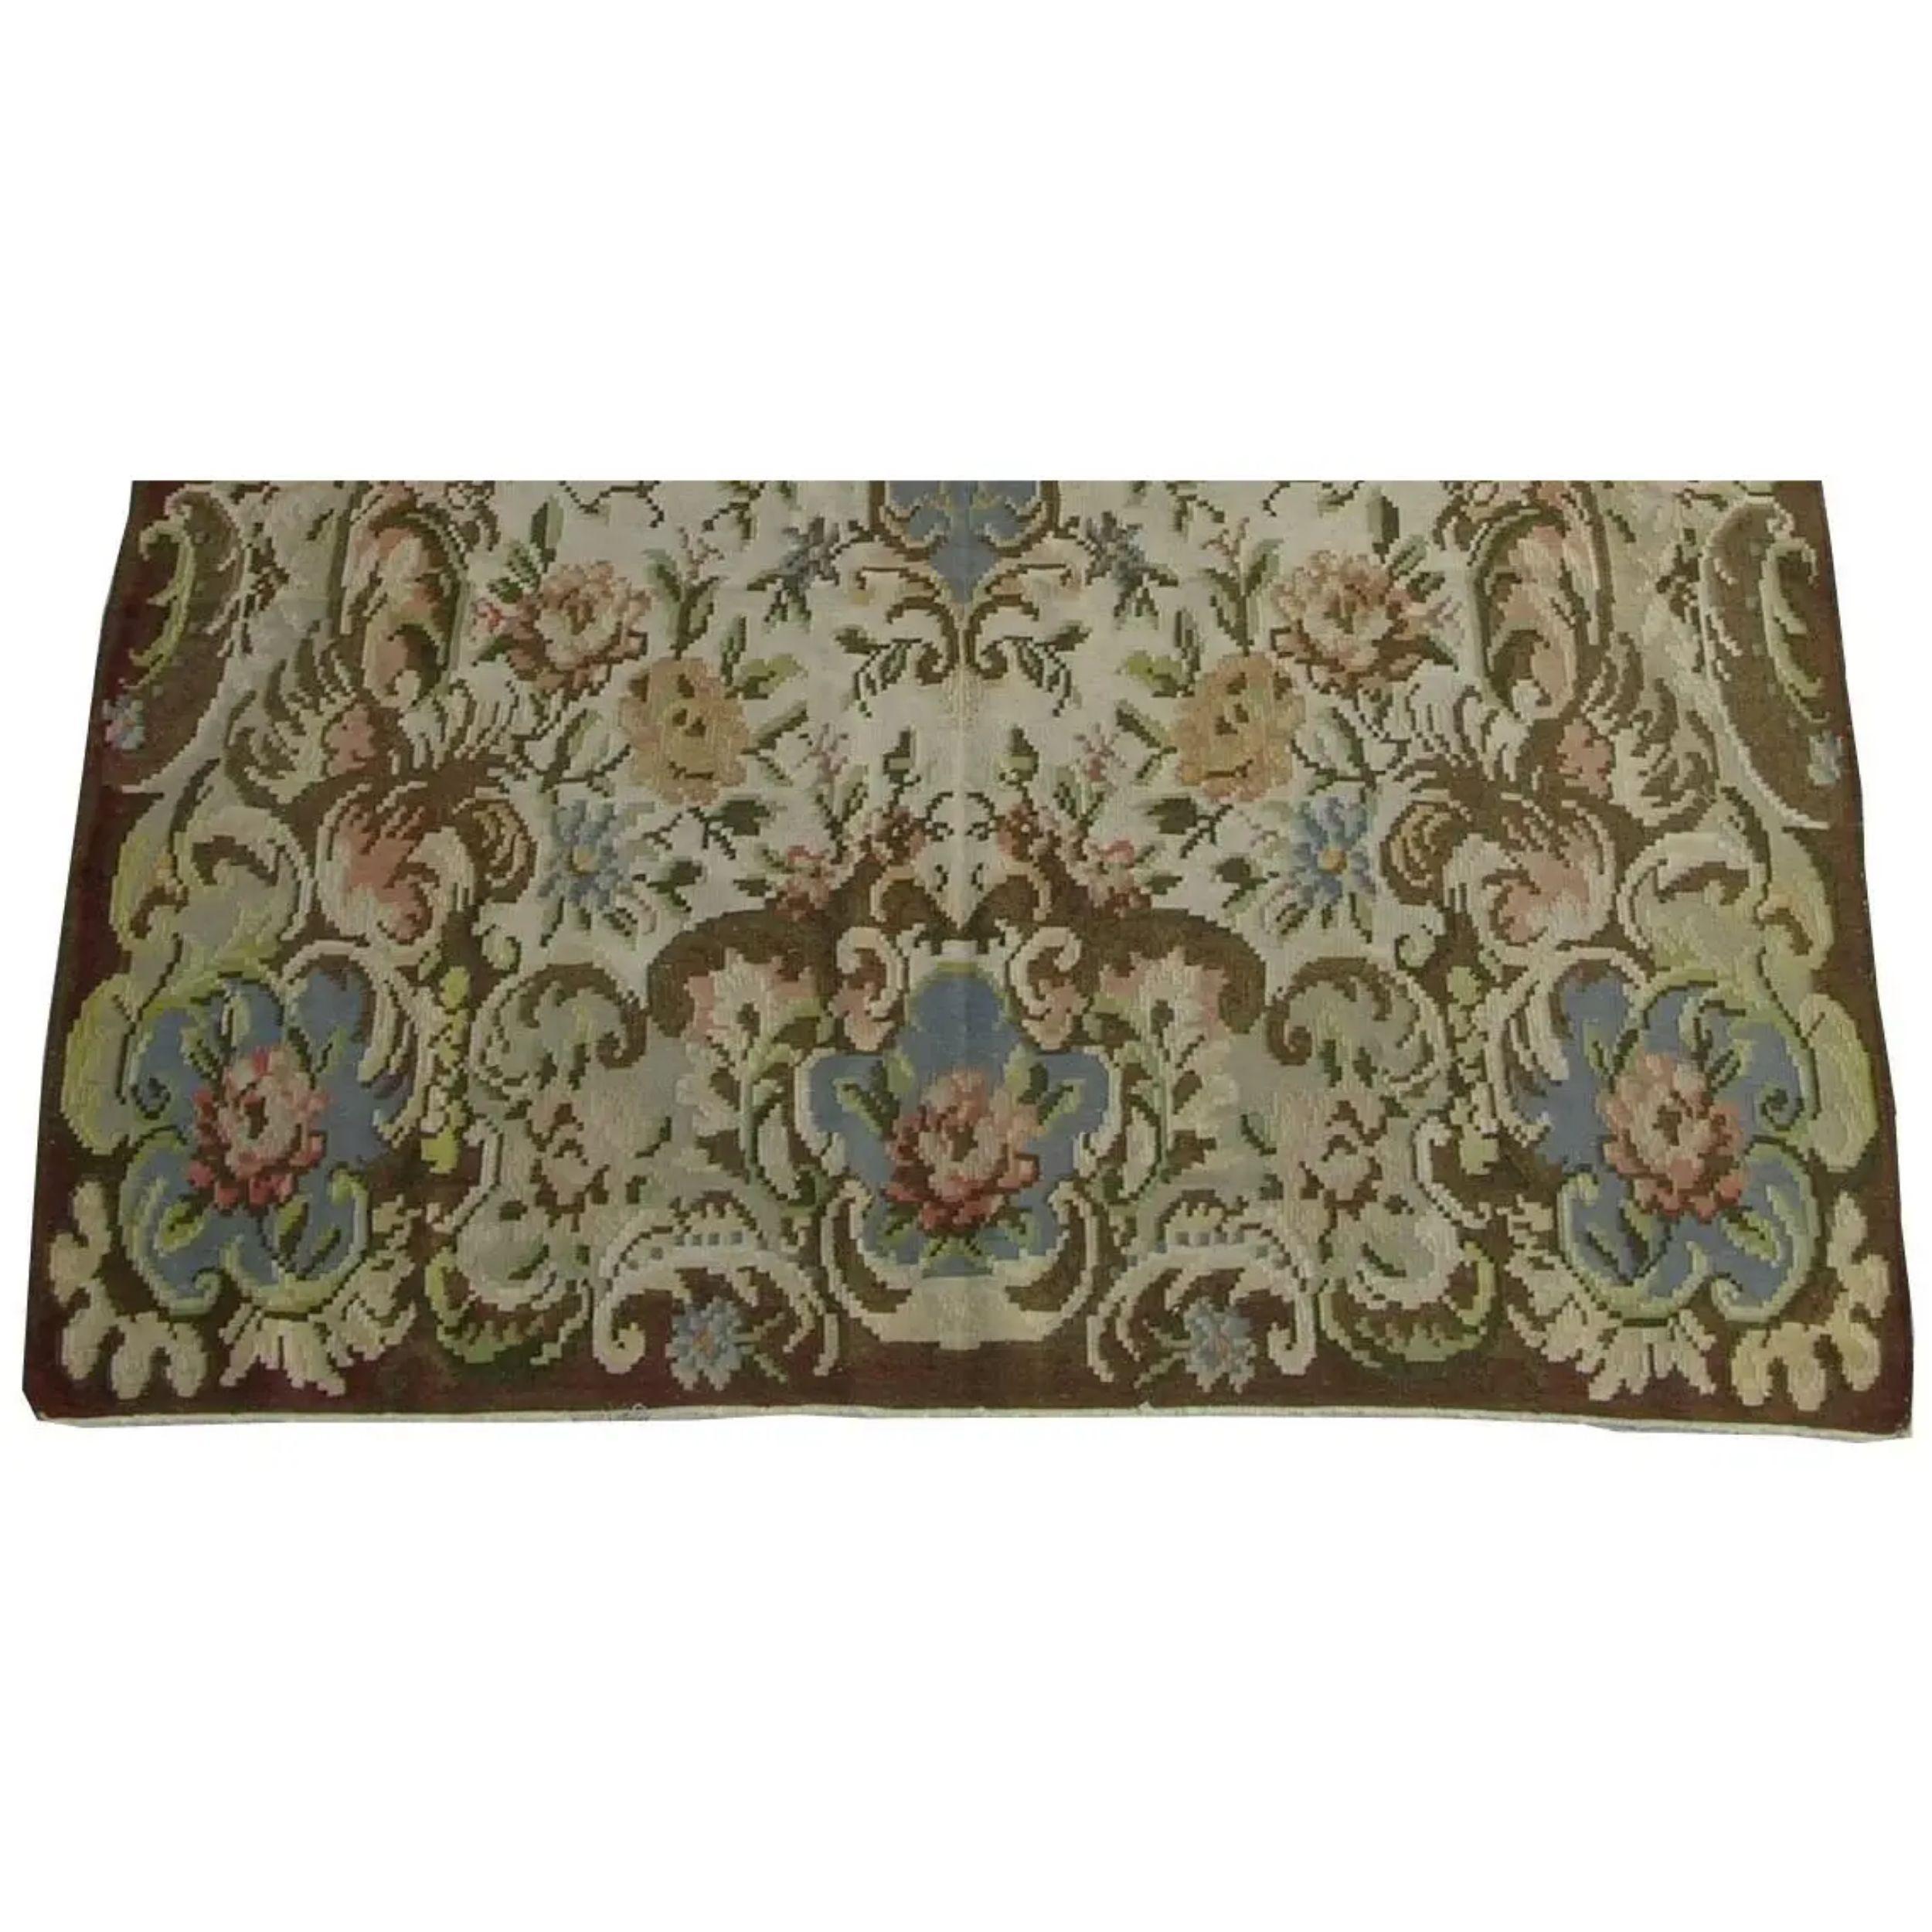 Antique Bessarabian Stylish Design 12'0'' X 6'7''

one of a kind 1 of 1

ask for more details